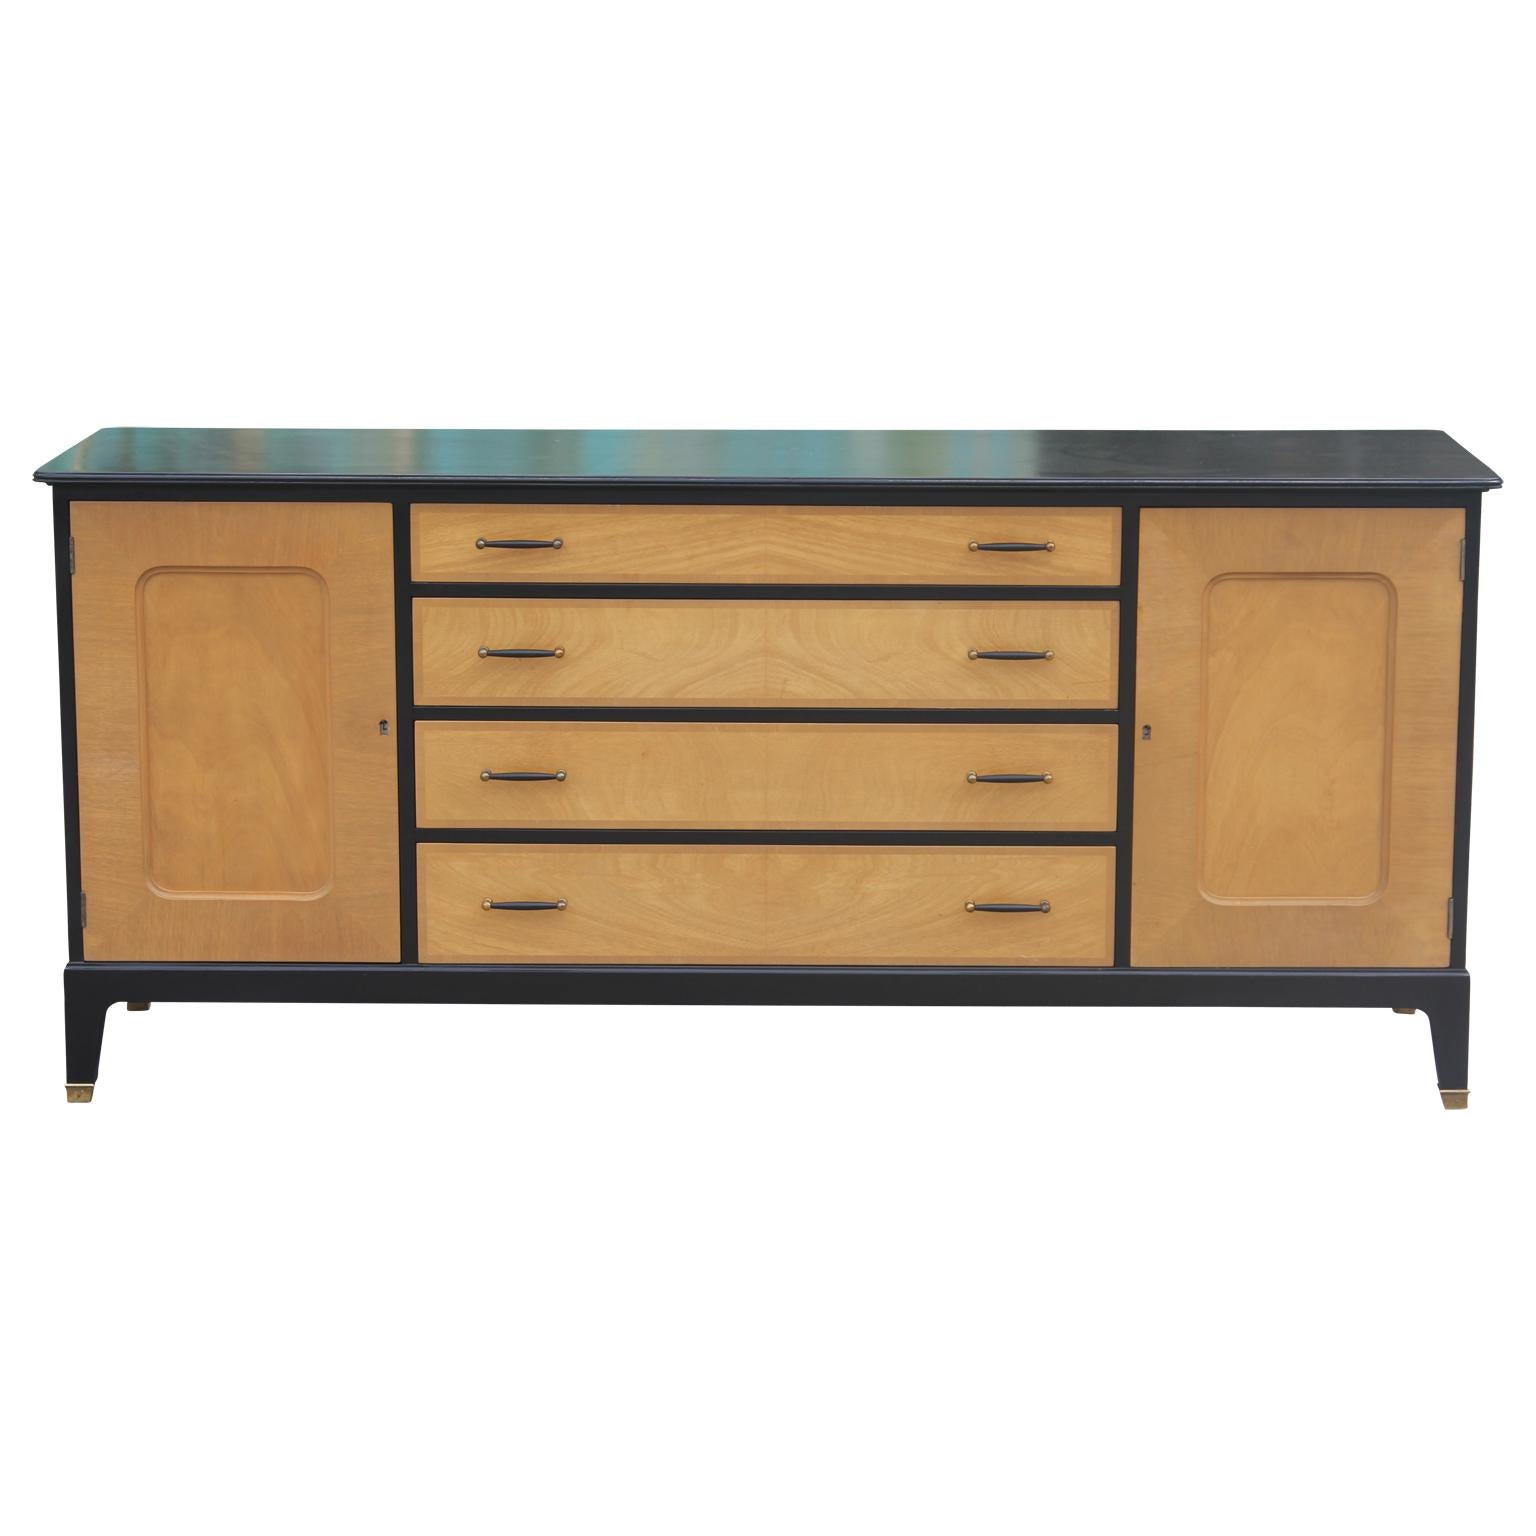 Modern two-tone four-drawer credenza or sideboard by Johnson Furniture.